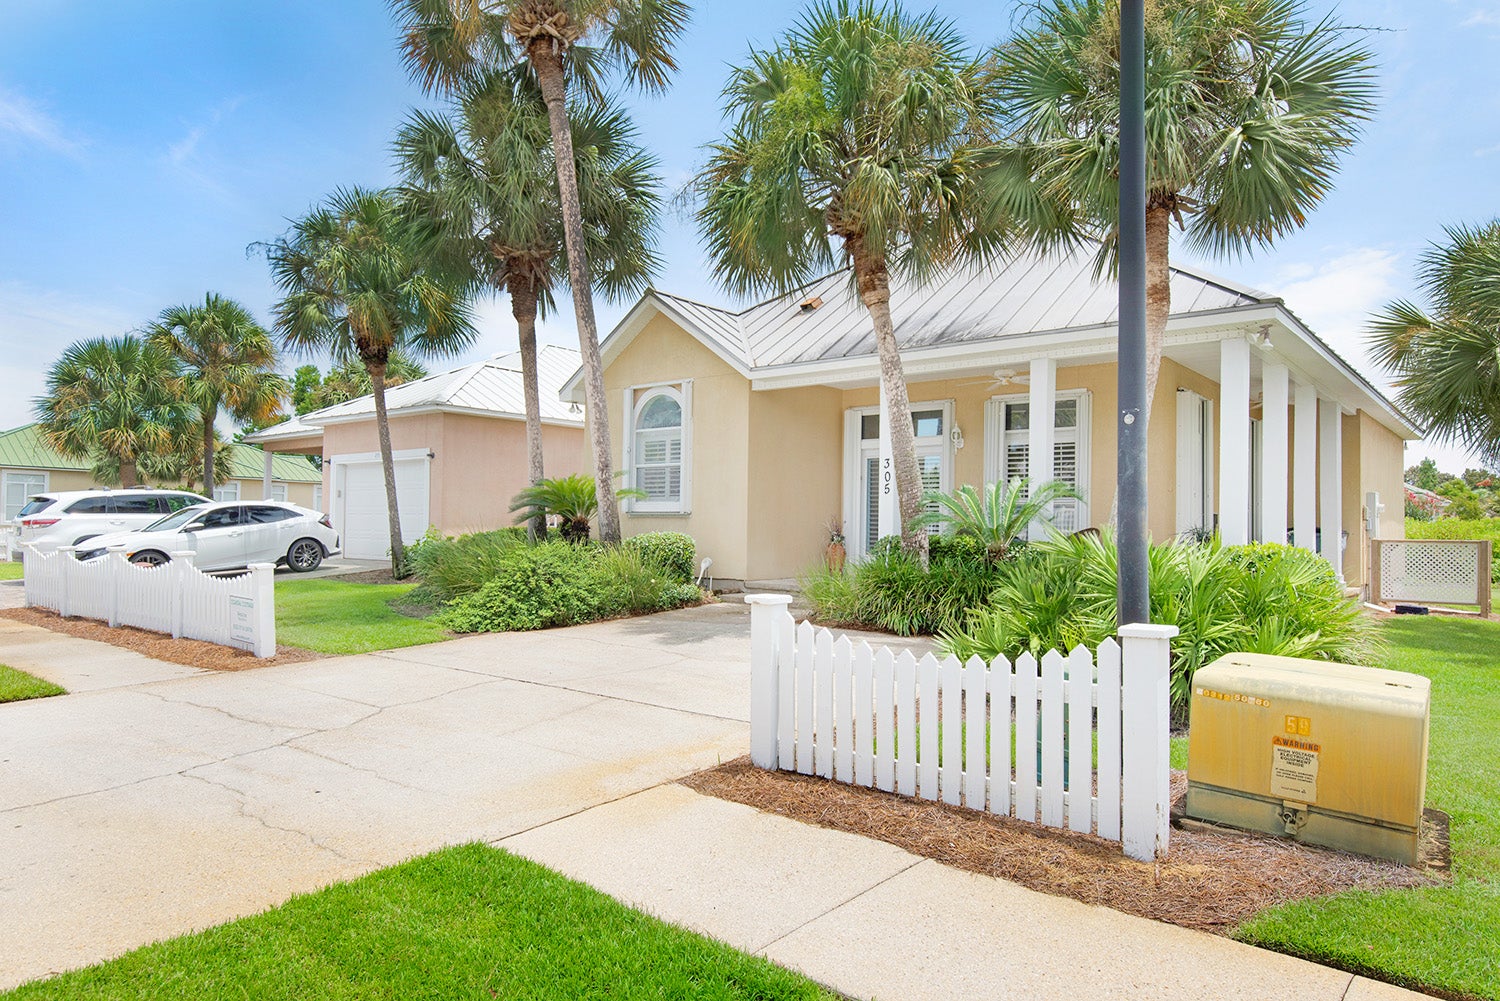 Beautifully landscaped and a white picket fence